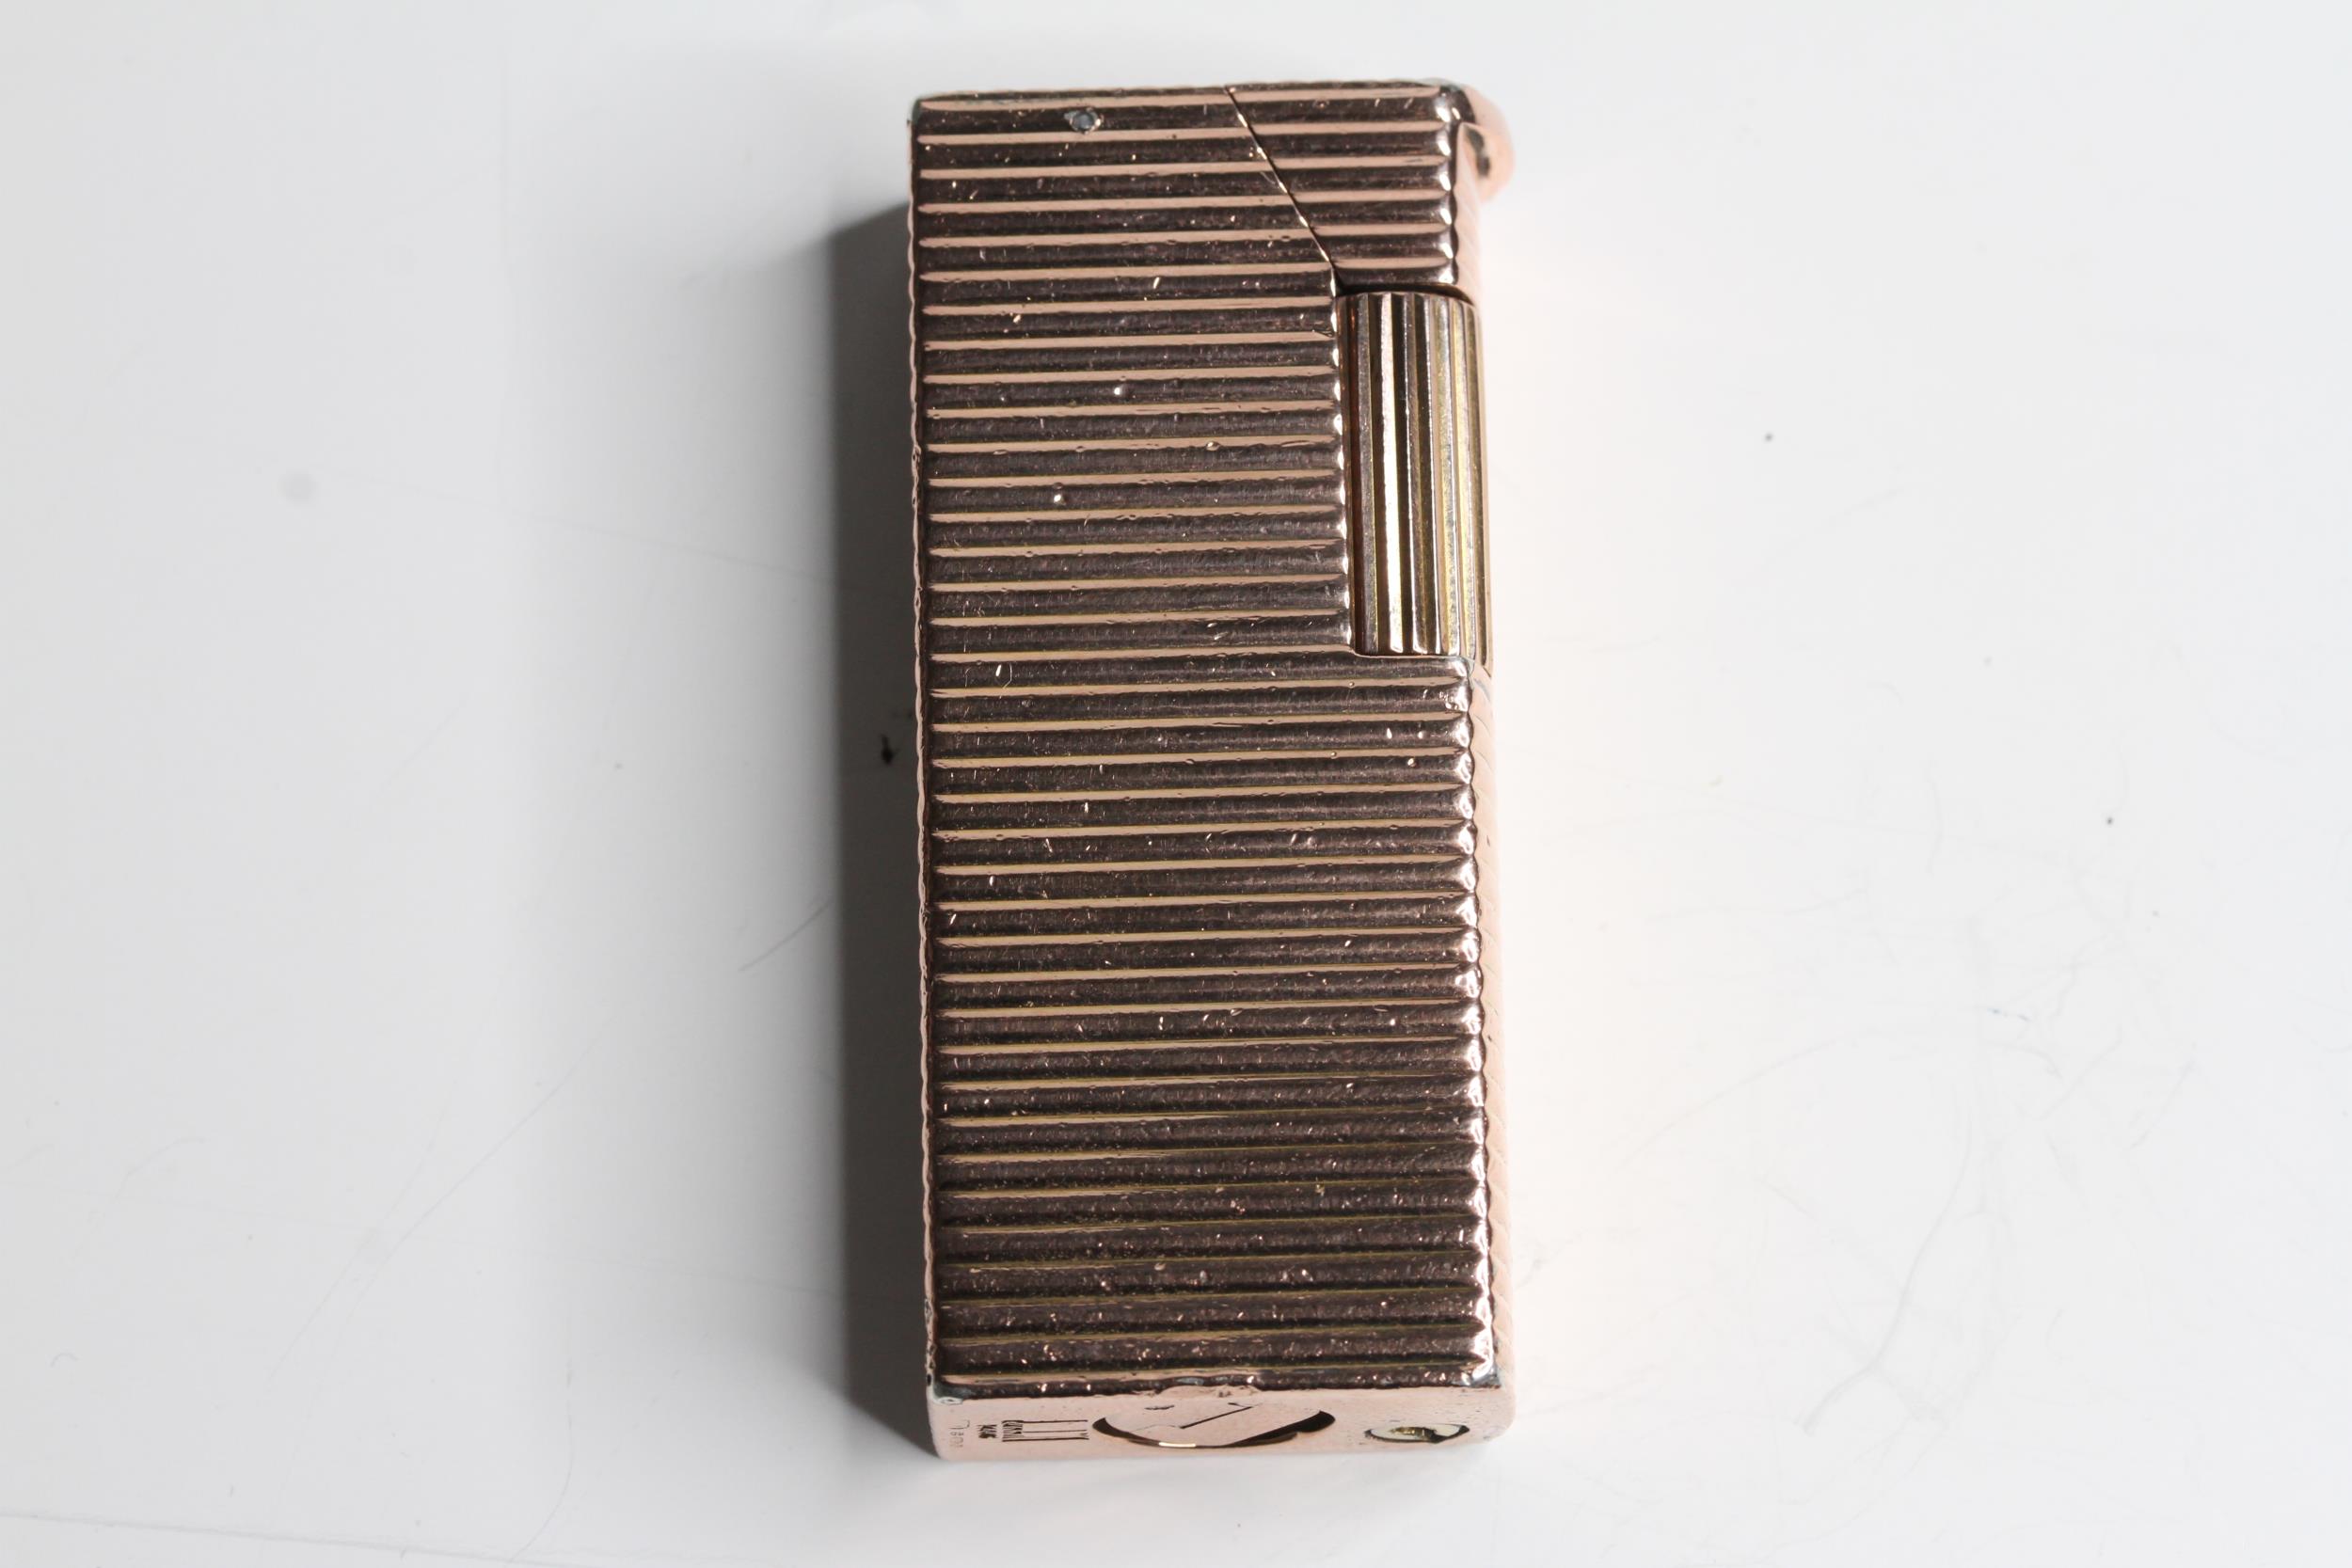 Vintage Aldunil Dunhill Pairs Lighter, Rose gold plated, French marks and Import marks to base,